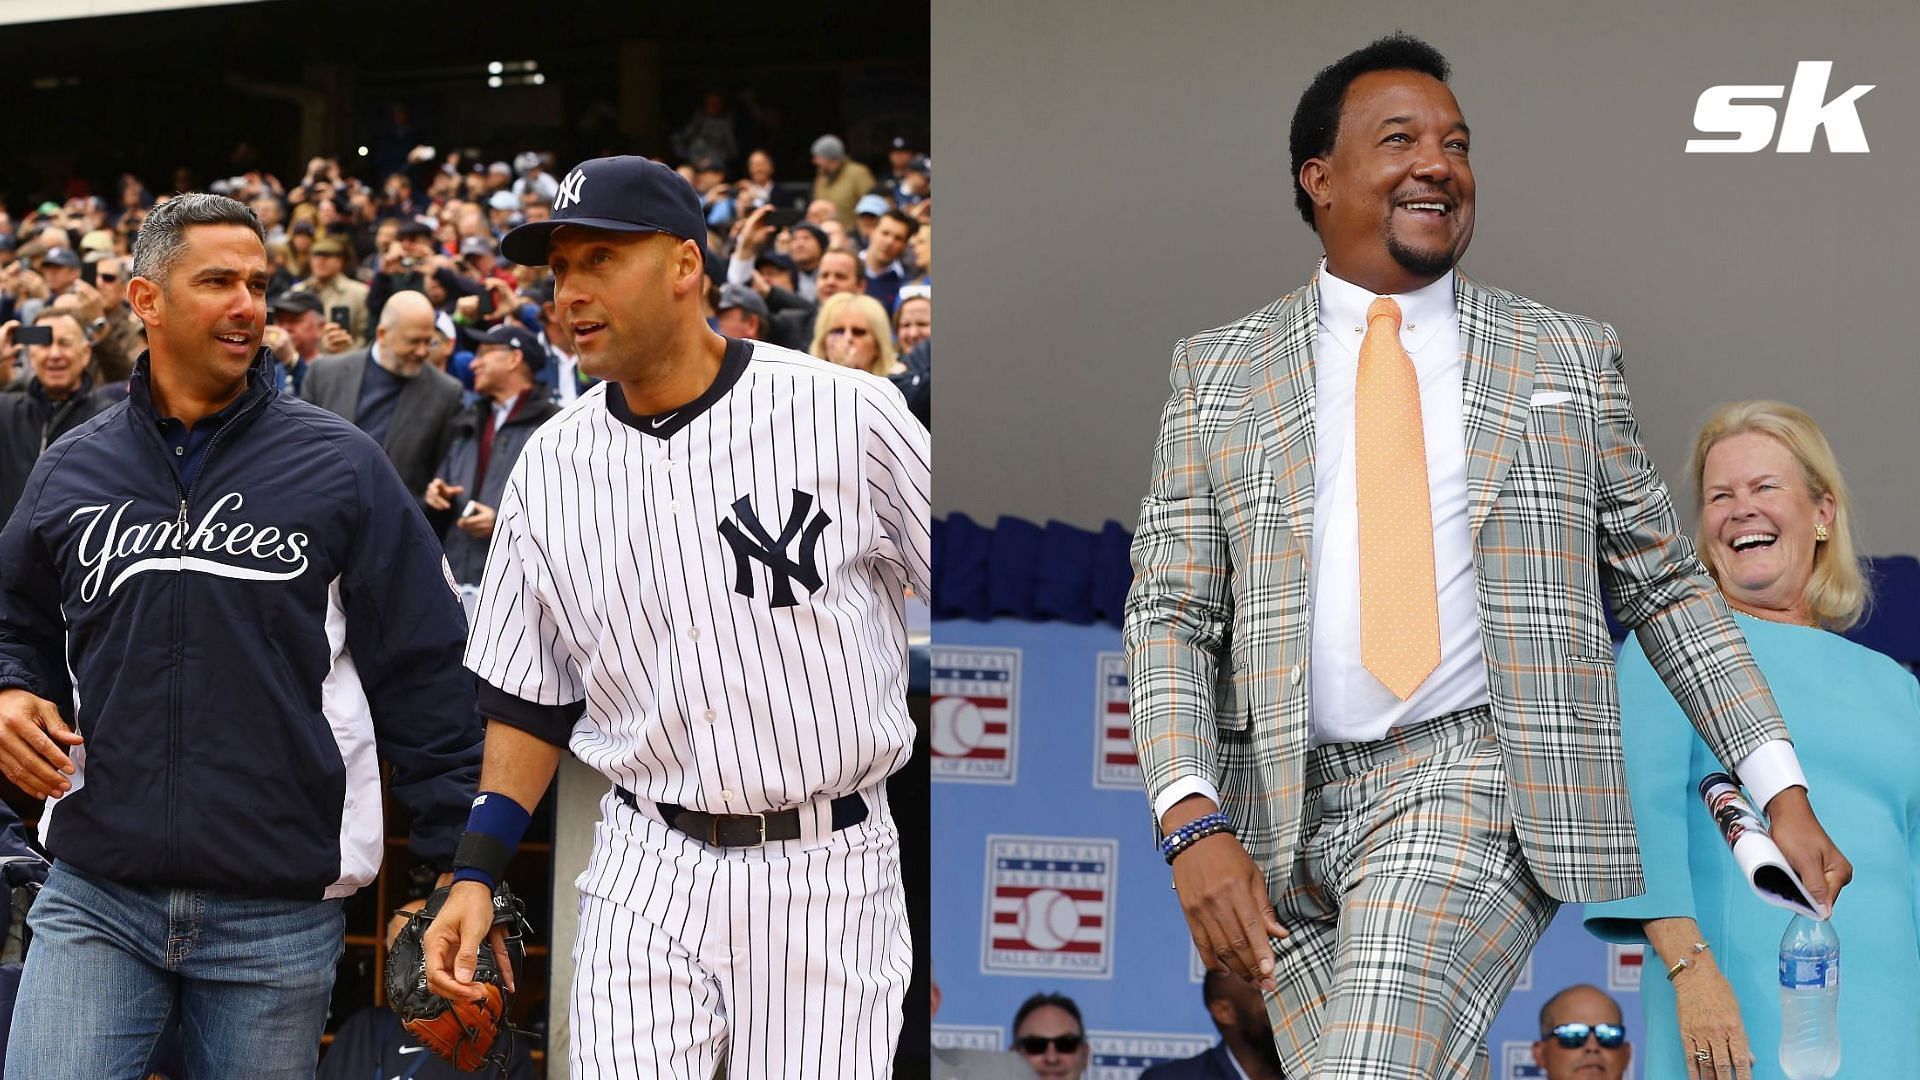 Hall of Famer Pedro Martinez claims to have asked for a trade to the New York Yankees three times in his career